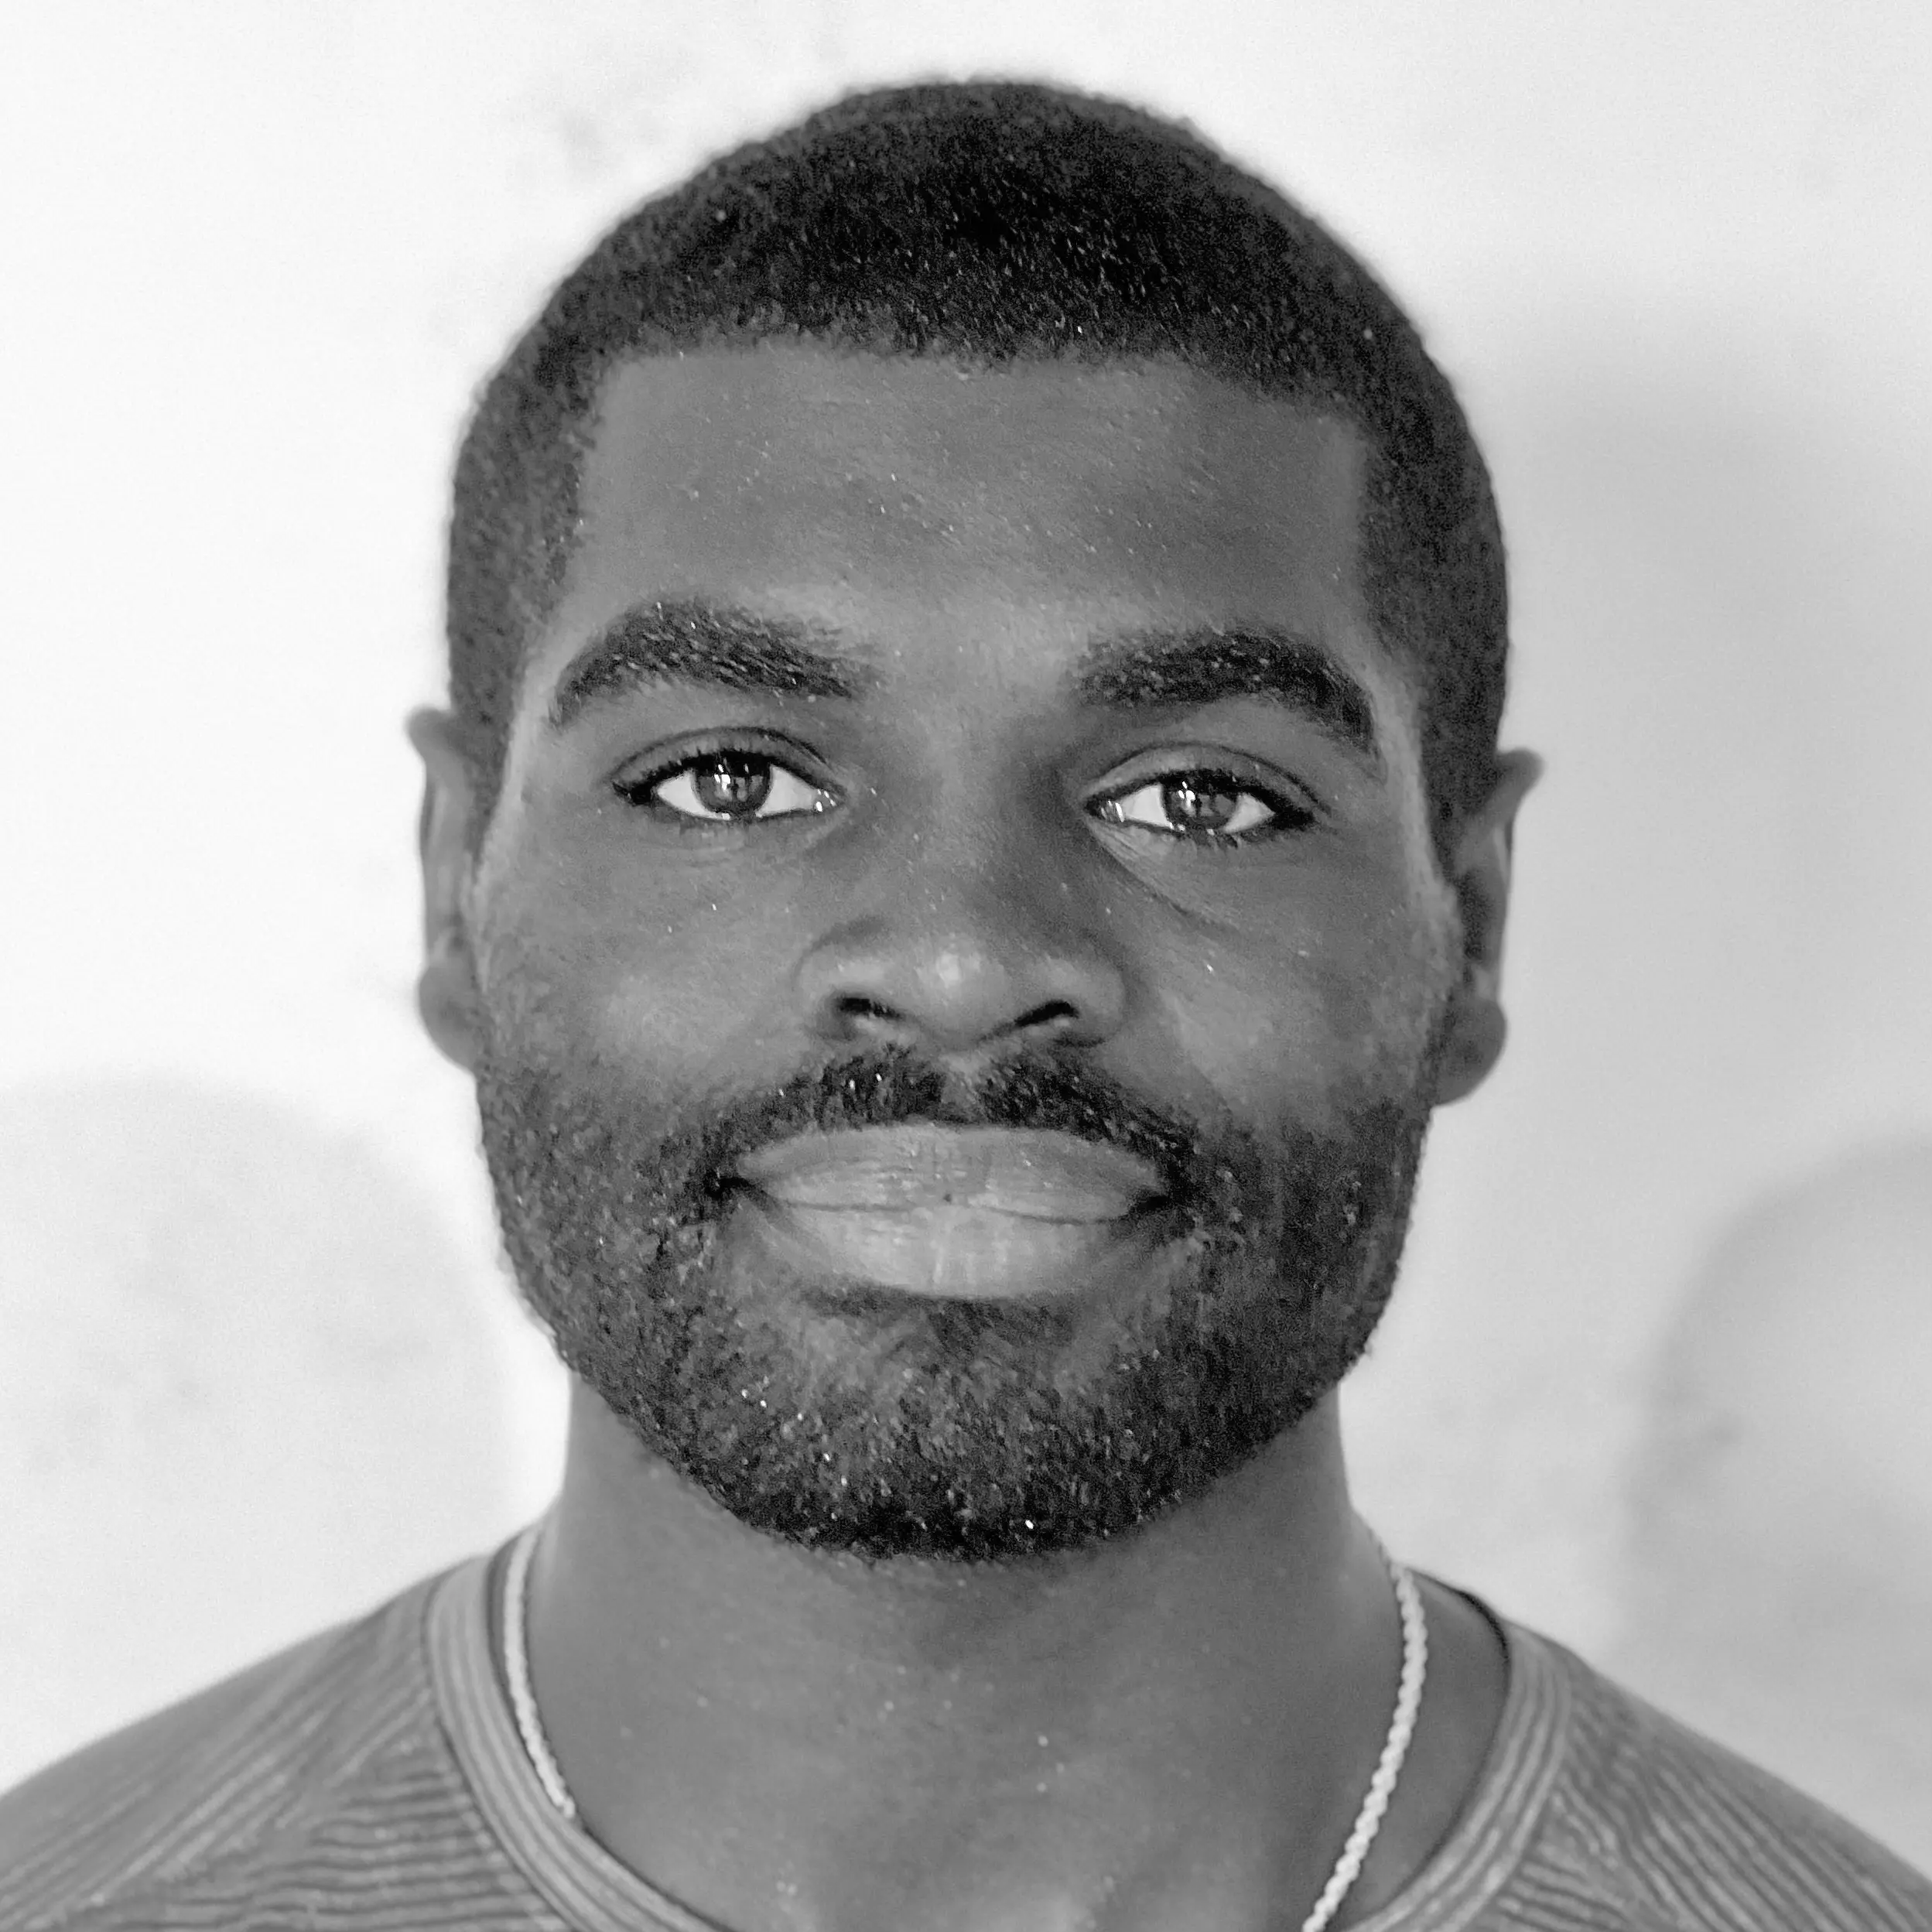 A black and white head shot image of Lee Evan Fish.